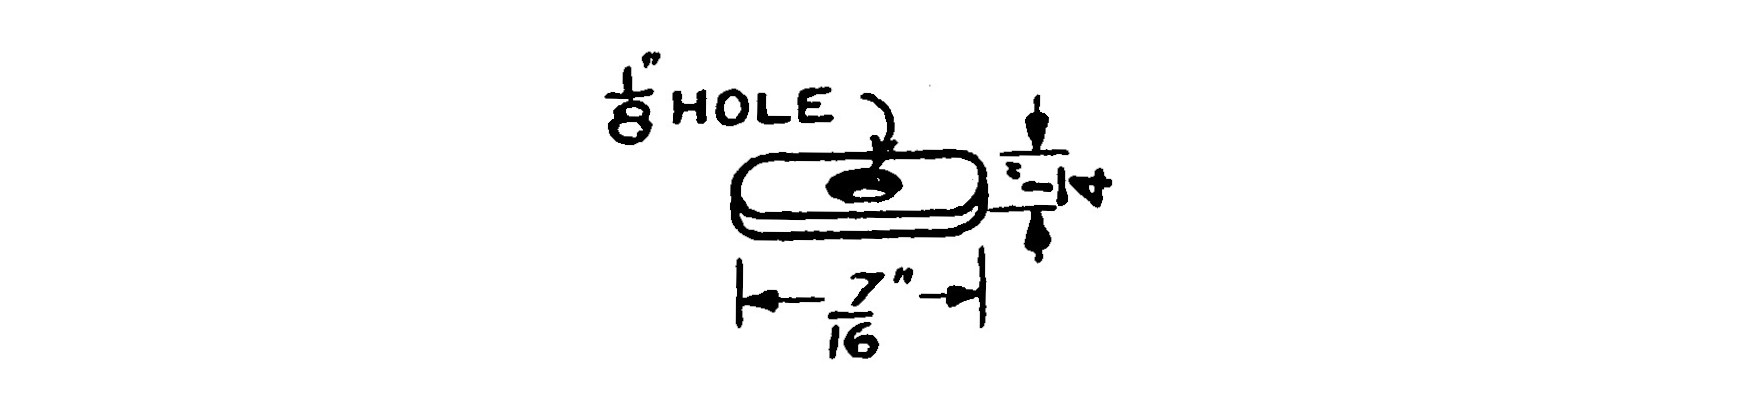 FIG. 37.—The Brass Contact.